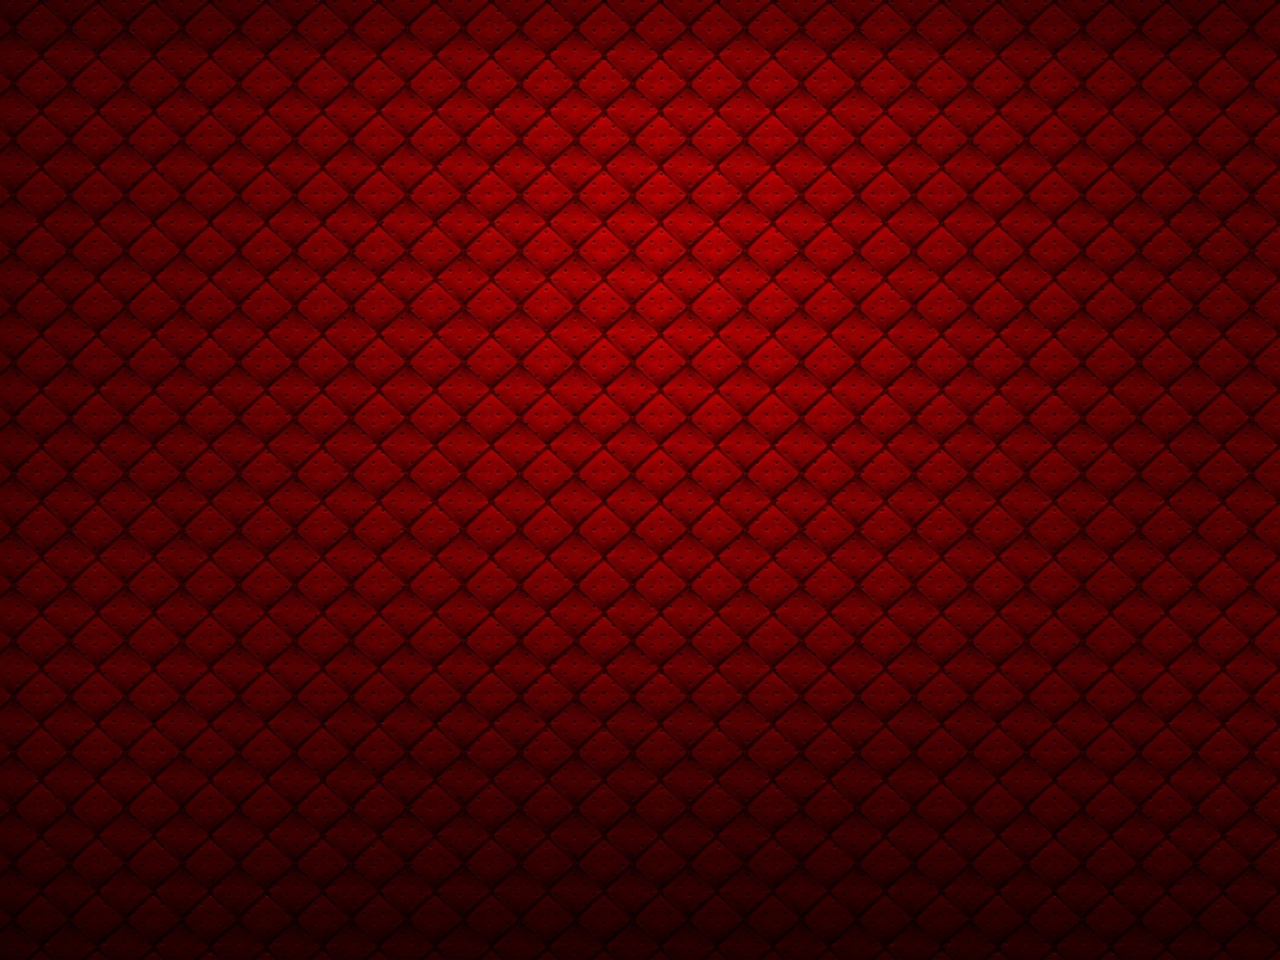 Still in Red for 1280 x 960 resolution